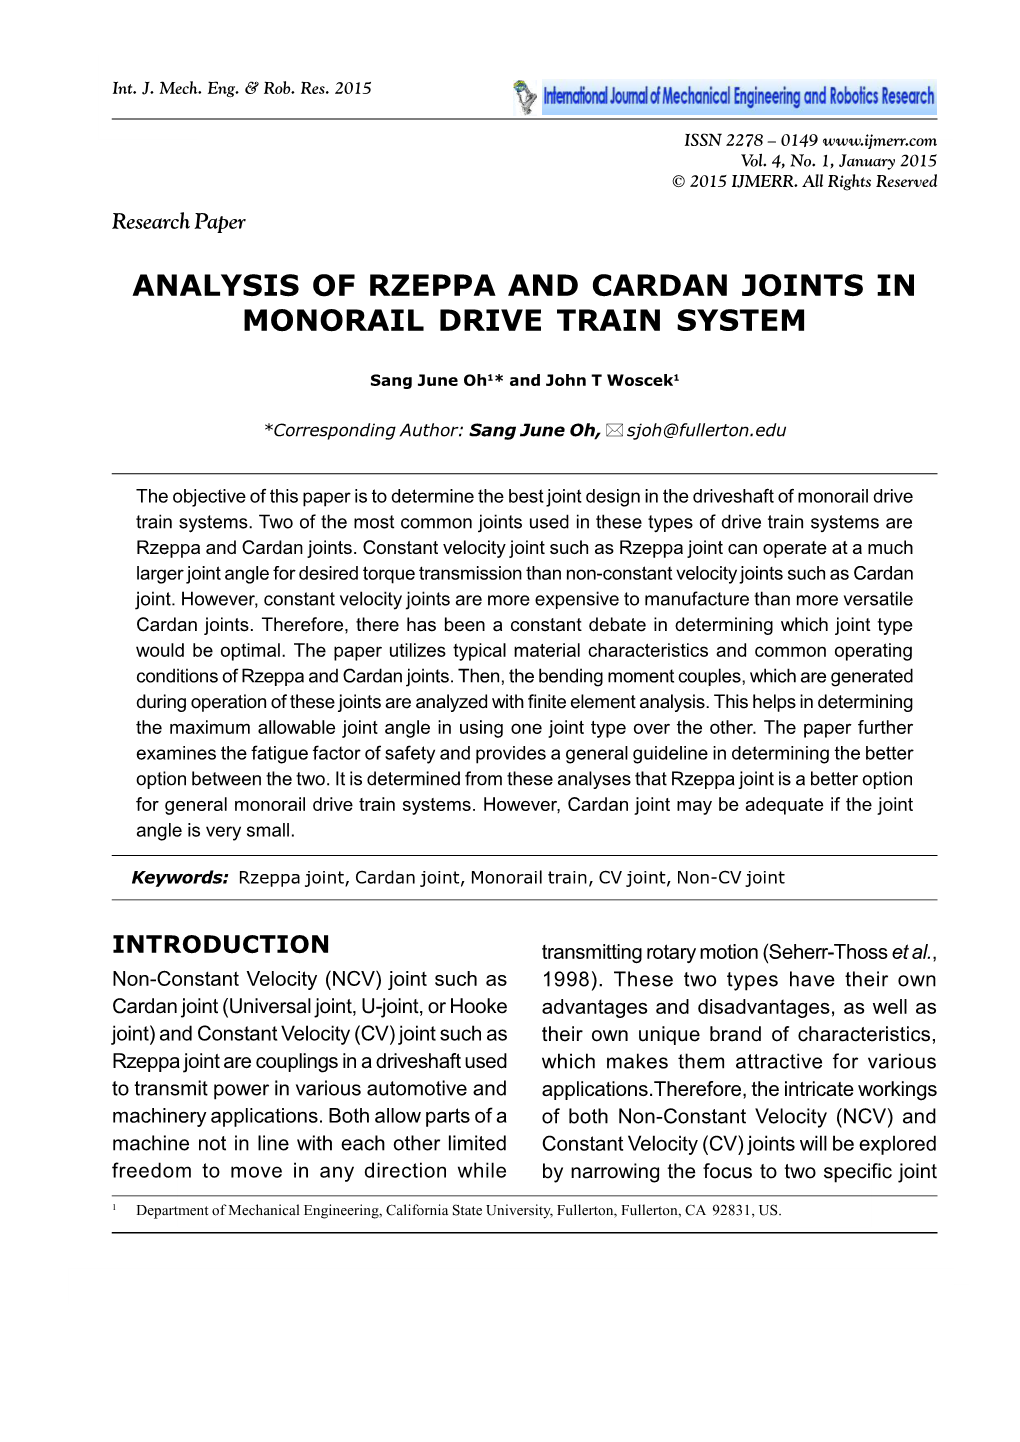 Analysis of Rzeppa and Cardan Joints in Monorail Drive Train System